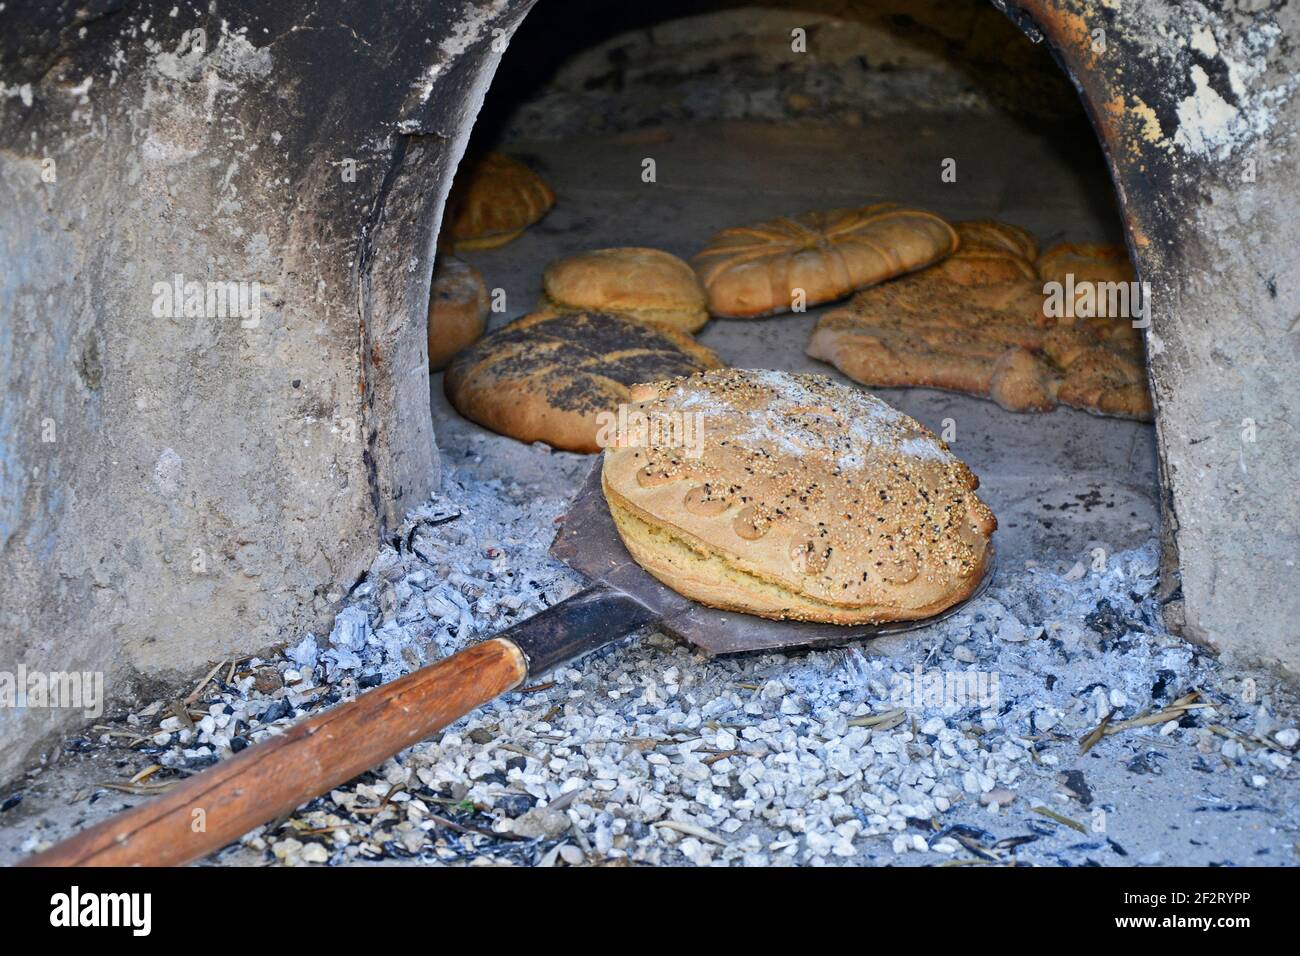 A selection of traditional handmade Cypriot breads coming from the stone oven Stock Photo